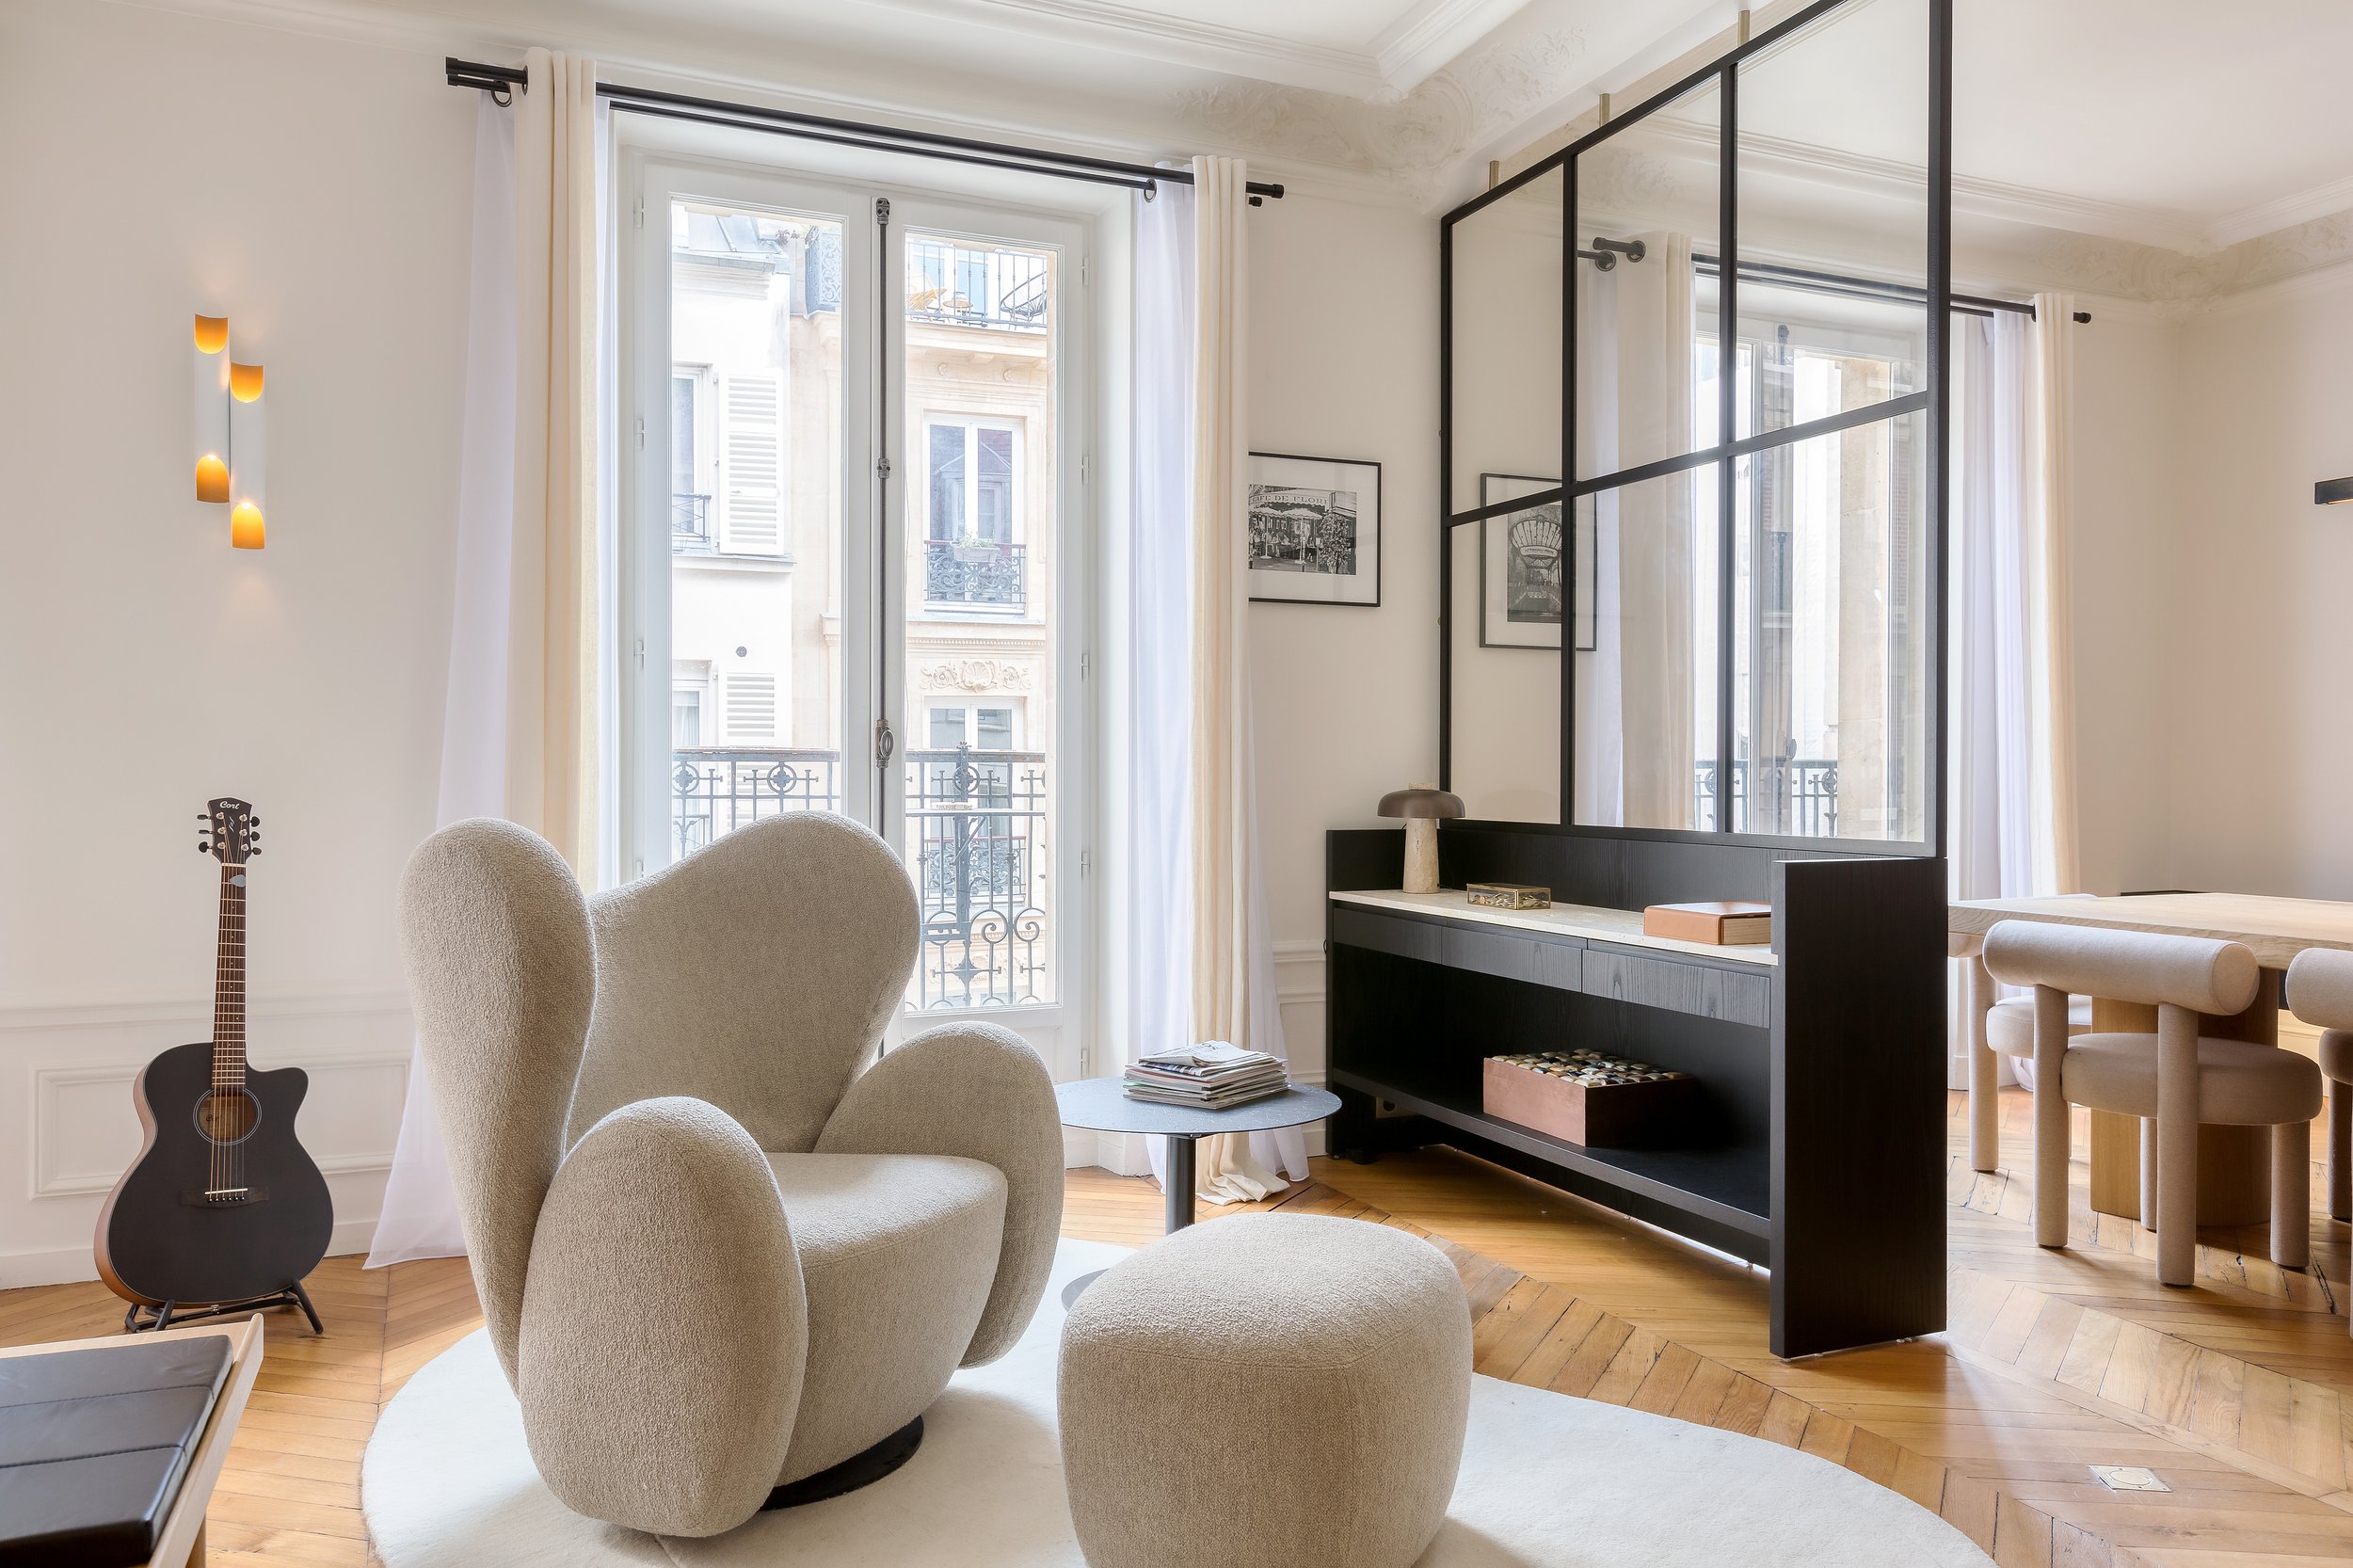 Francis York Boutique Pied-a-Terre in Paris For Under $2,000,000 00003.jpg